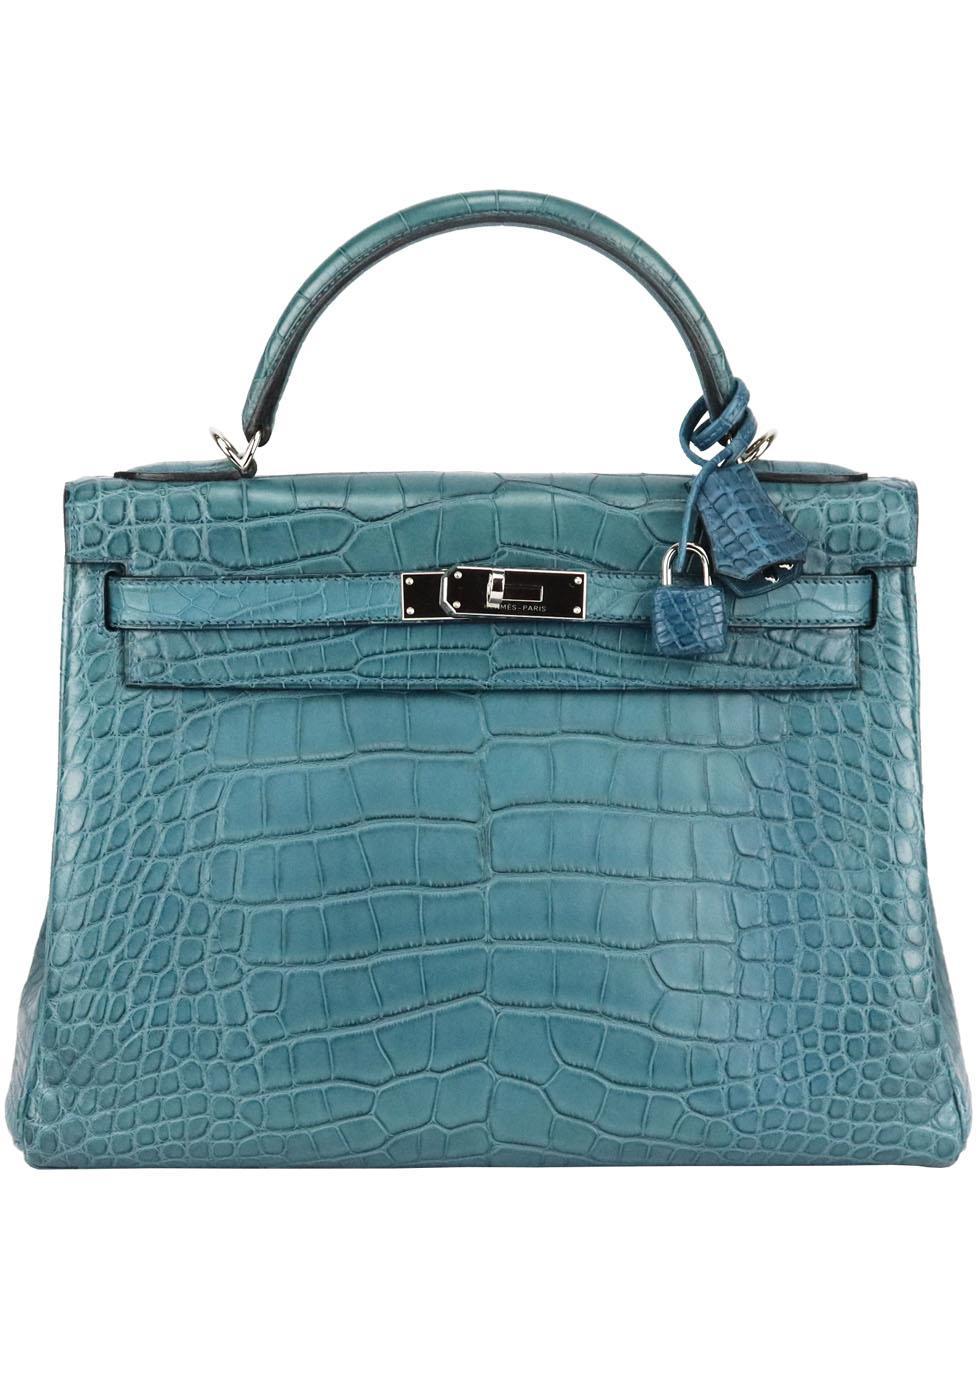 Made in France, this beautiful 2015 Hermès ‘Kelly’ 30cm handbag has been made from textured Matte Alligator Mississippiensis leather exterior in ‘blue’ and matching leather interior, this piece is decorated with palladium hardware on the front and